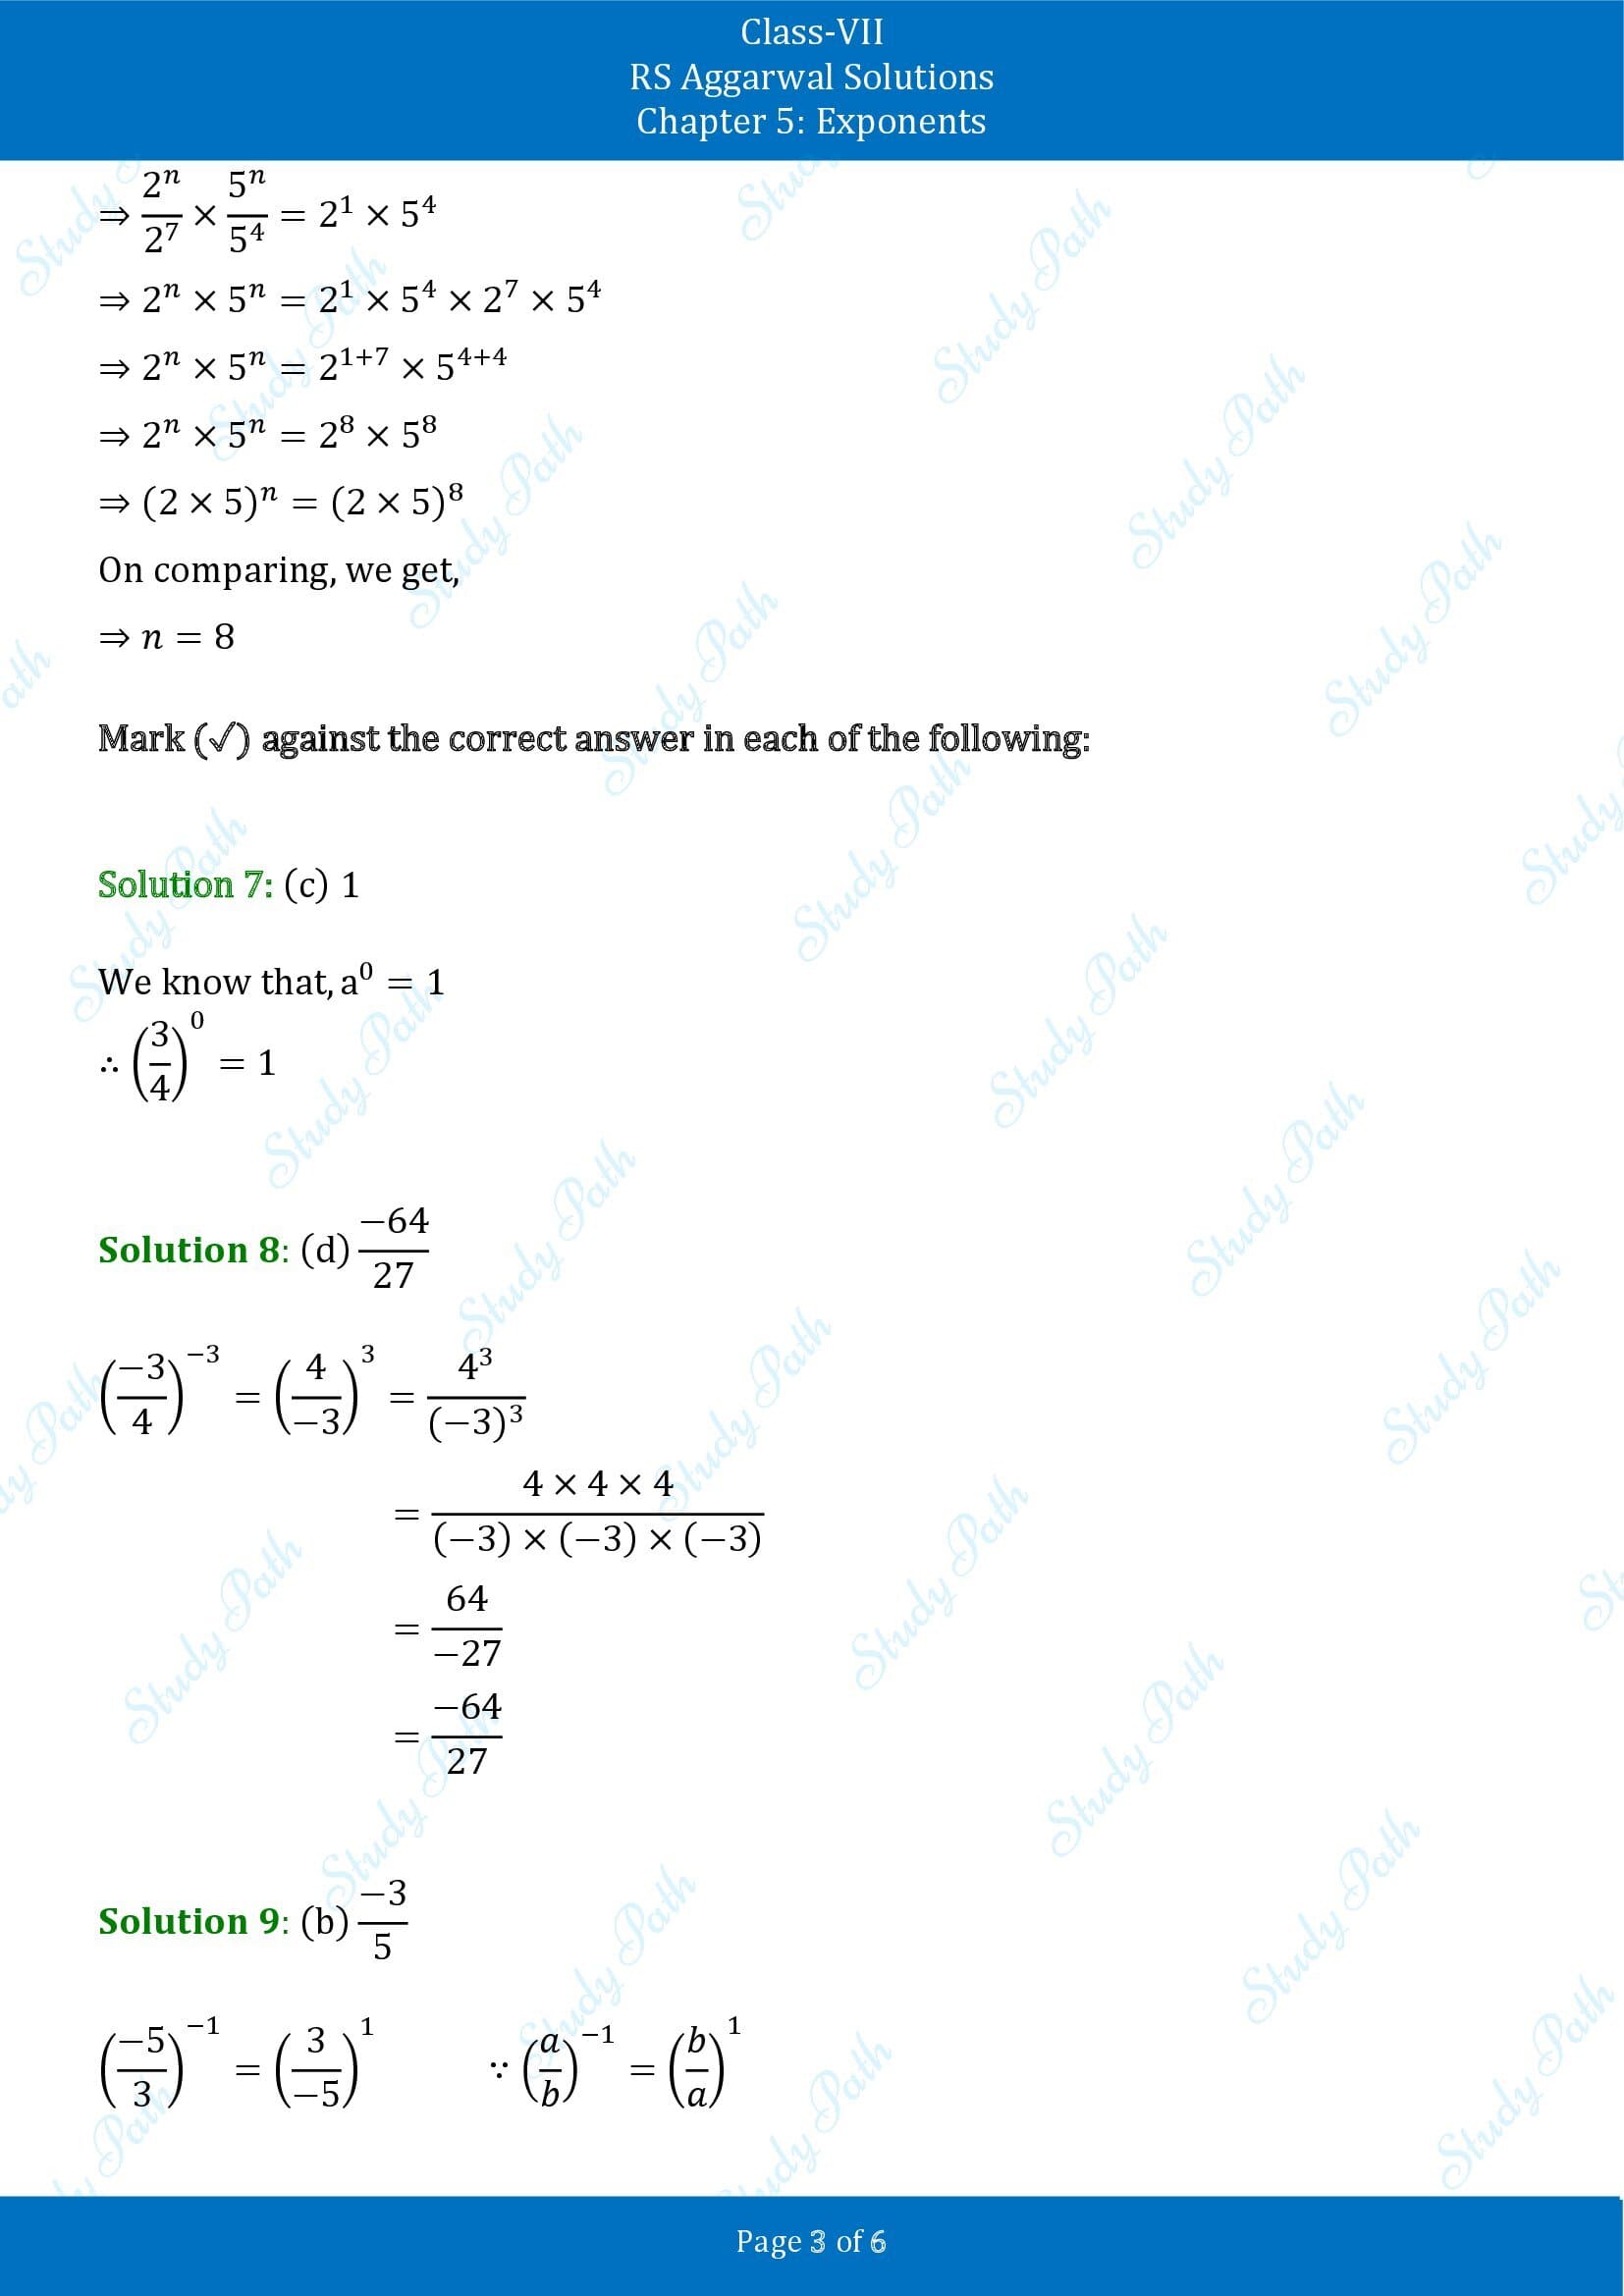 RS Aggarwal Solutions Class 7 Chapter 5 Exponents Test Paper 00003